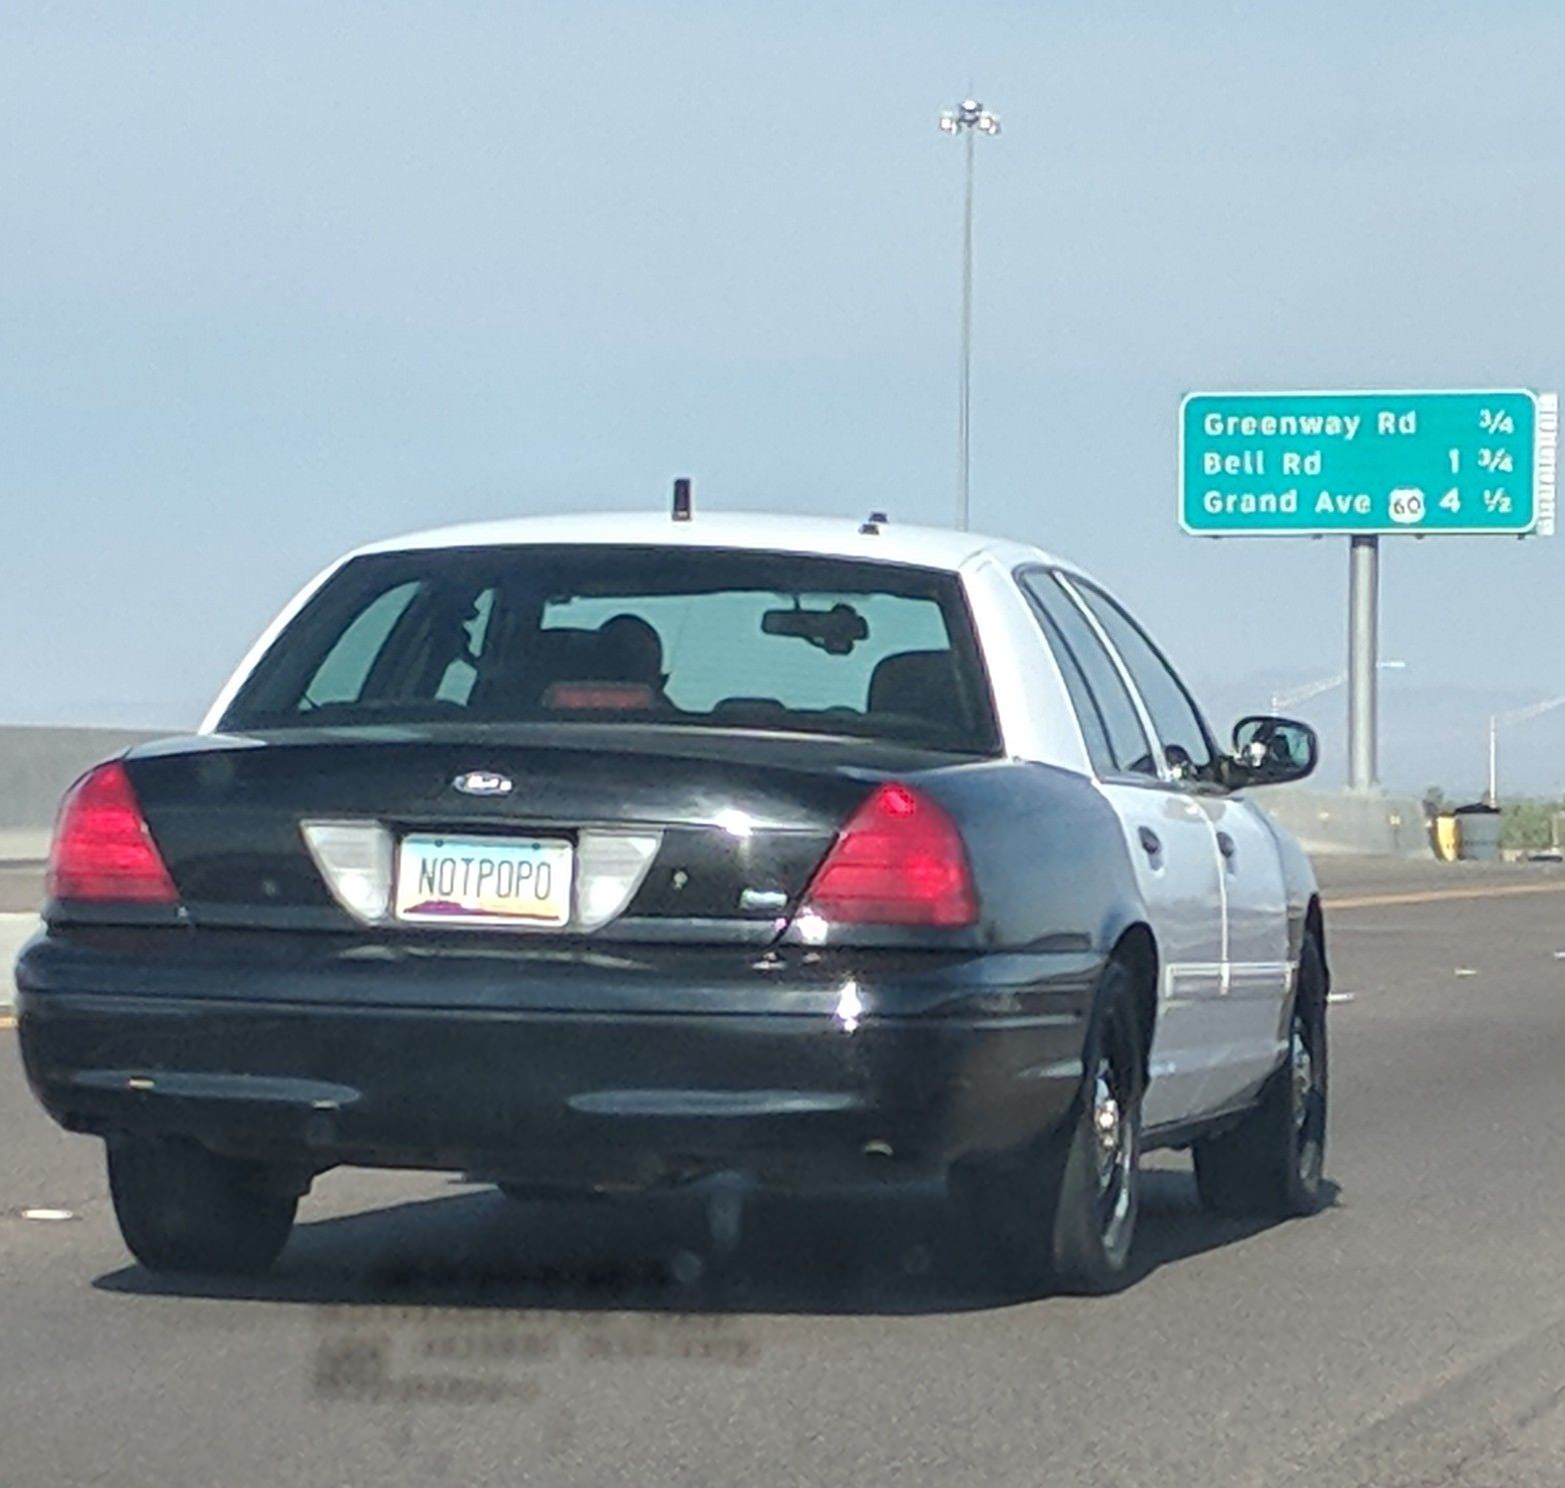 The license plate on this retired police car.